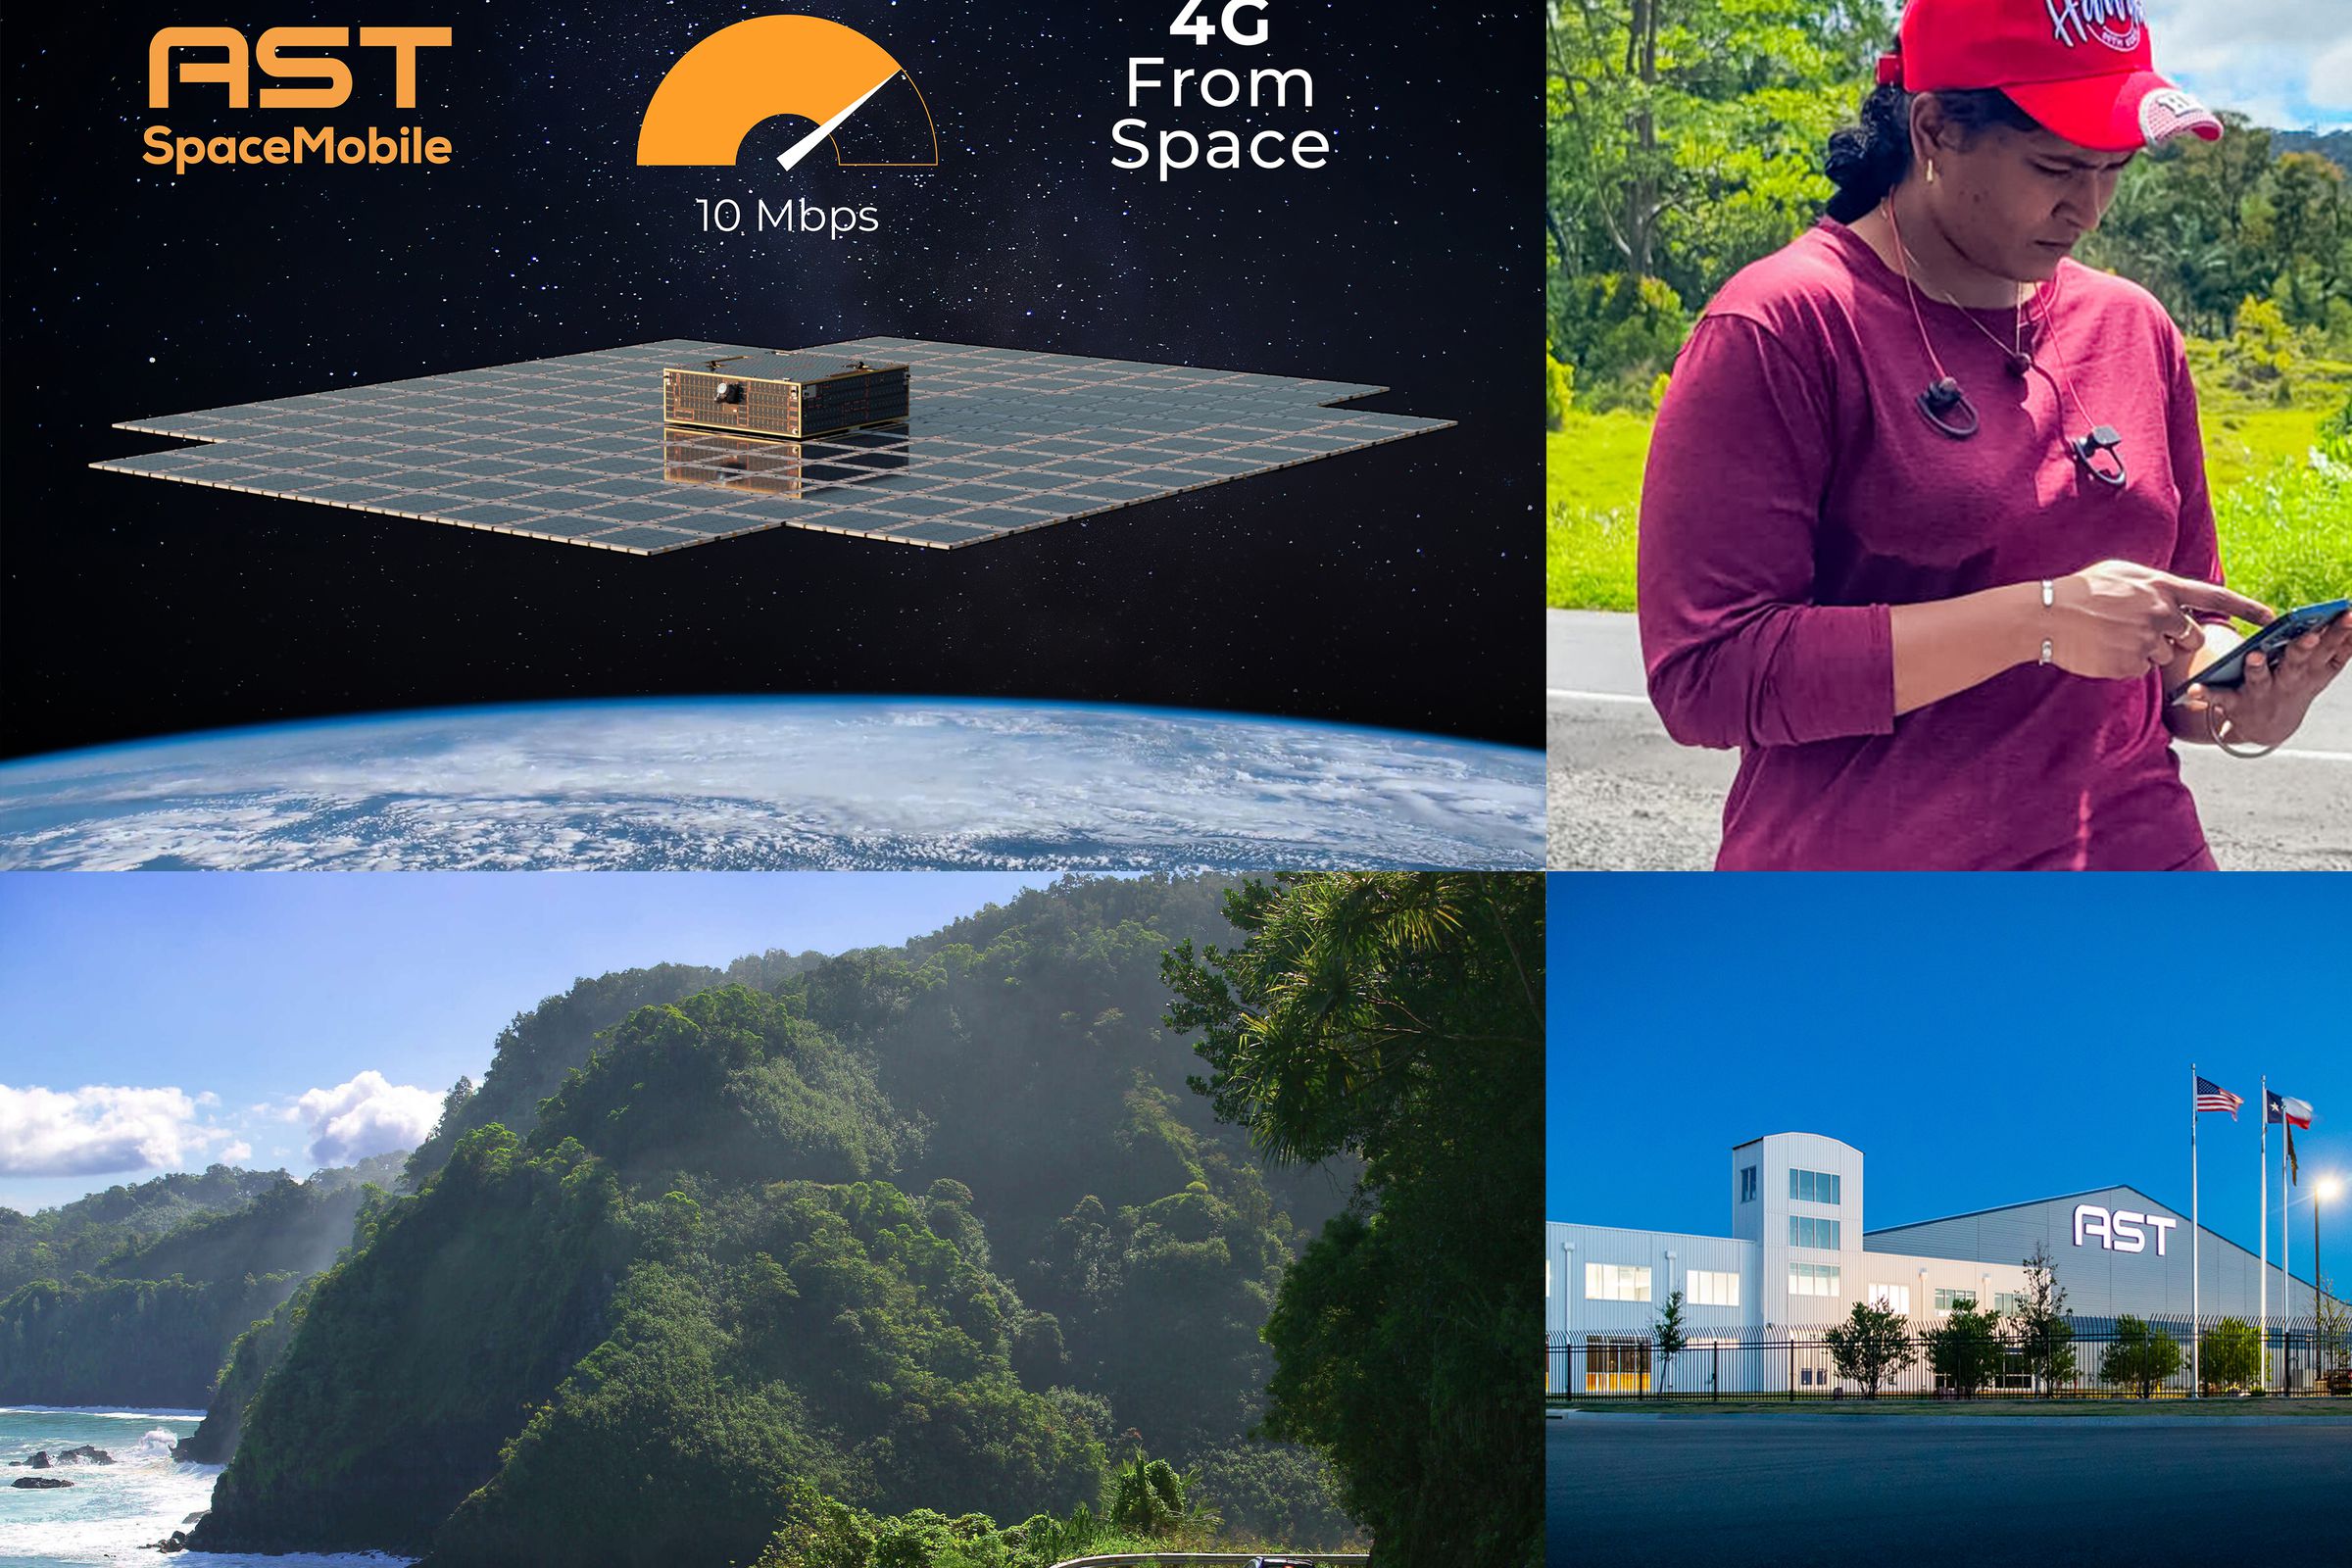 A collage of images showing the satellite array, a person using a cell phone, a hawaiian vista, and an AST building.